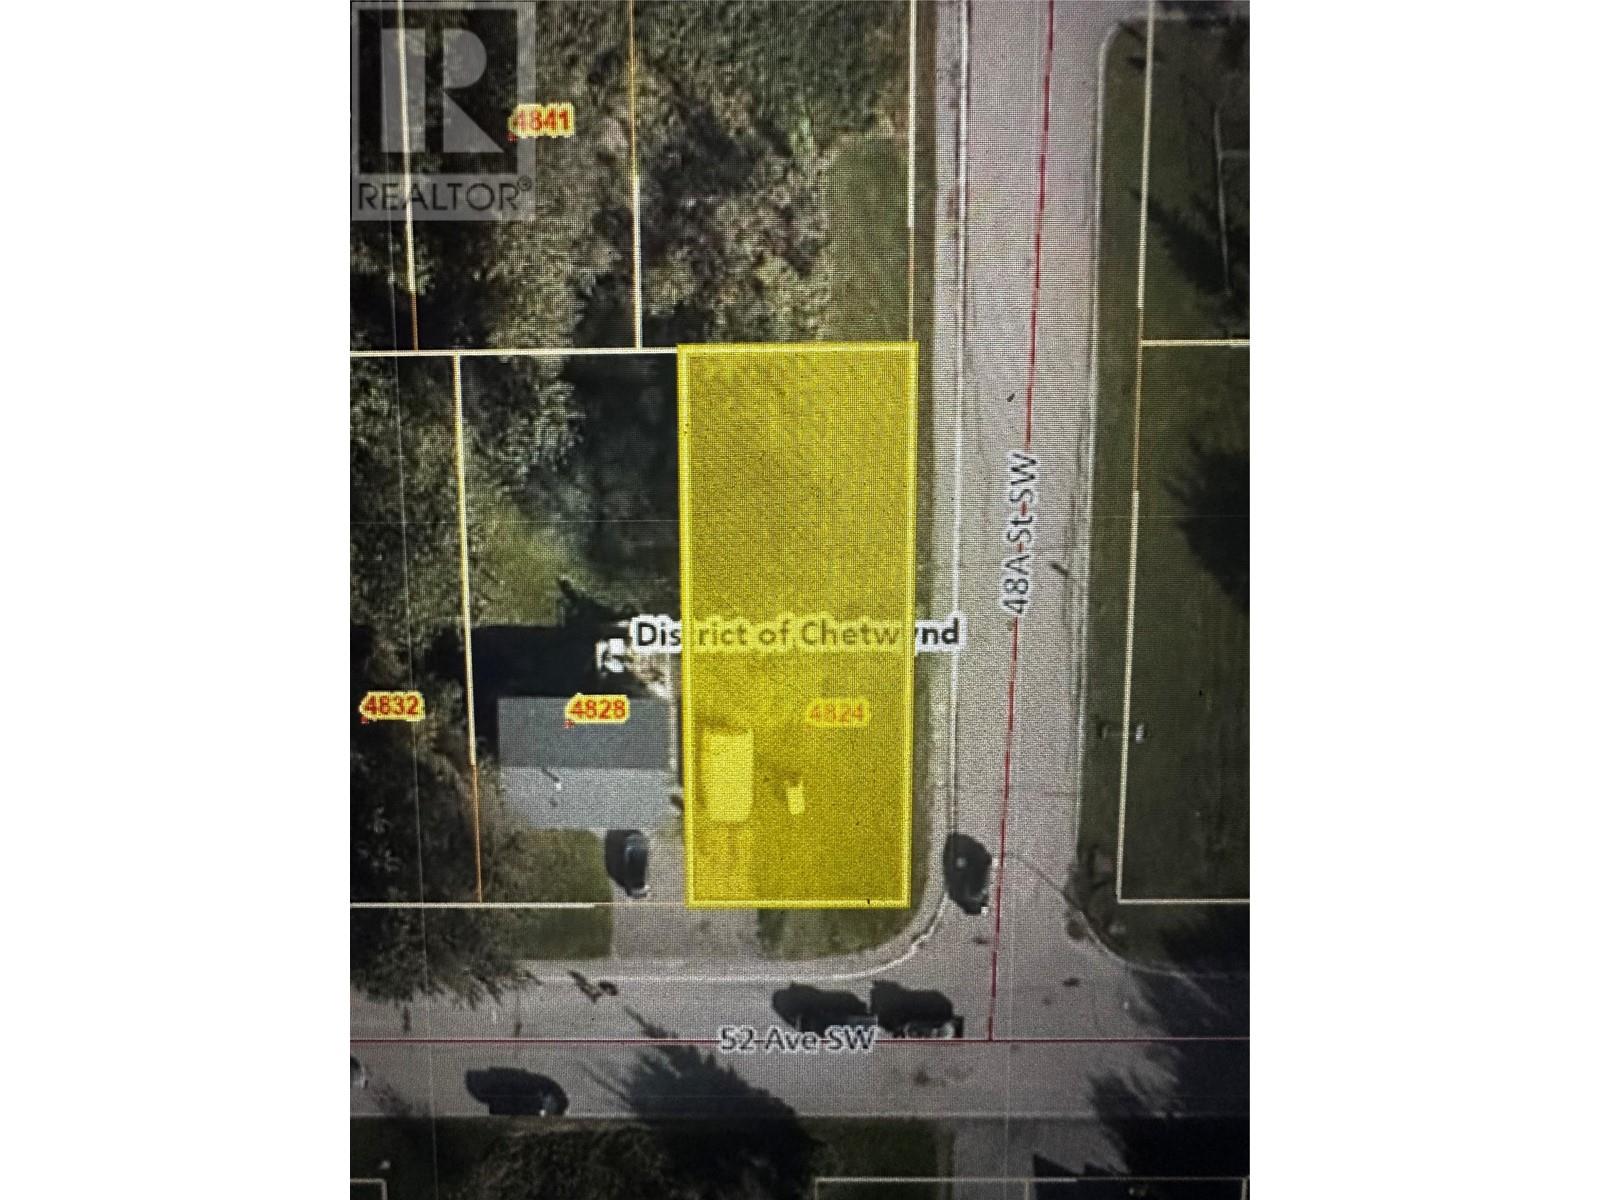 Vacant Land For Sale | 4824 52 Avenue Sw | Chetwynd | V0C1J0